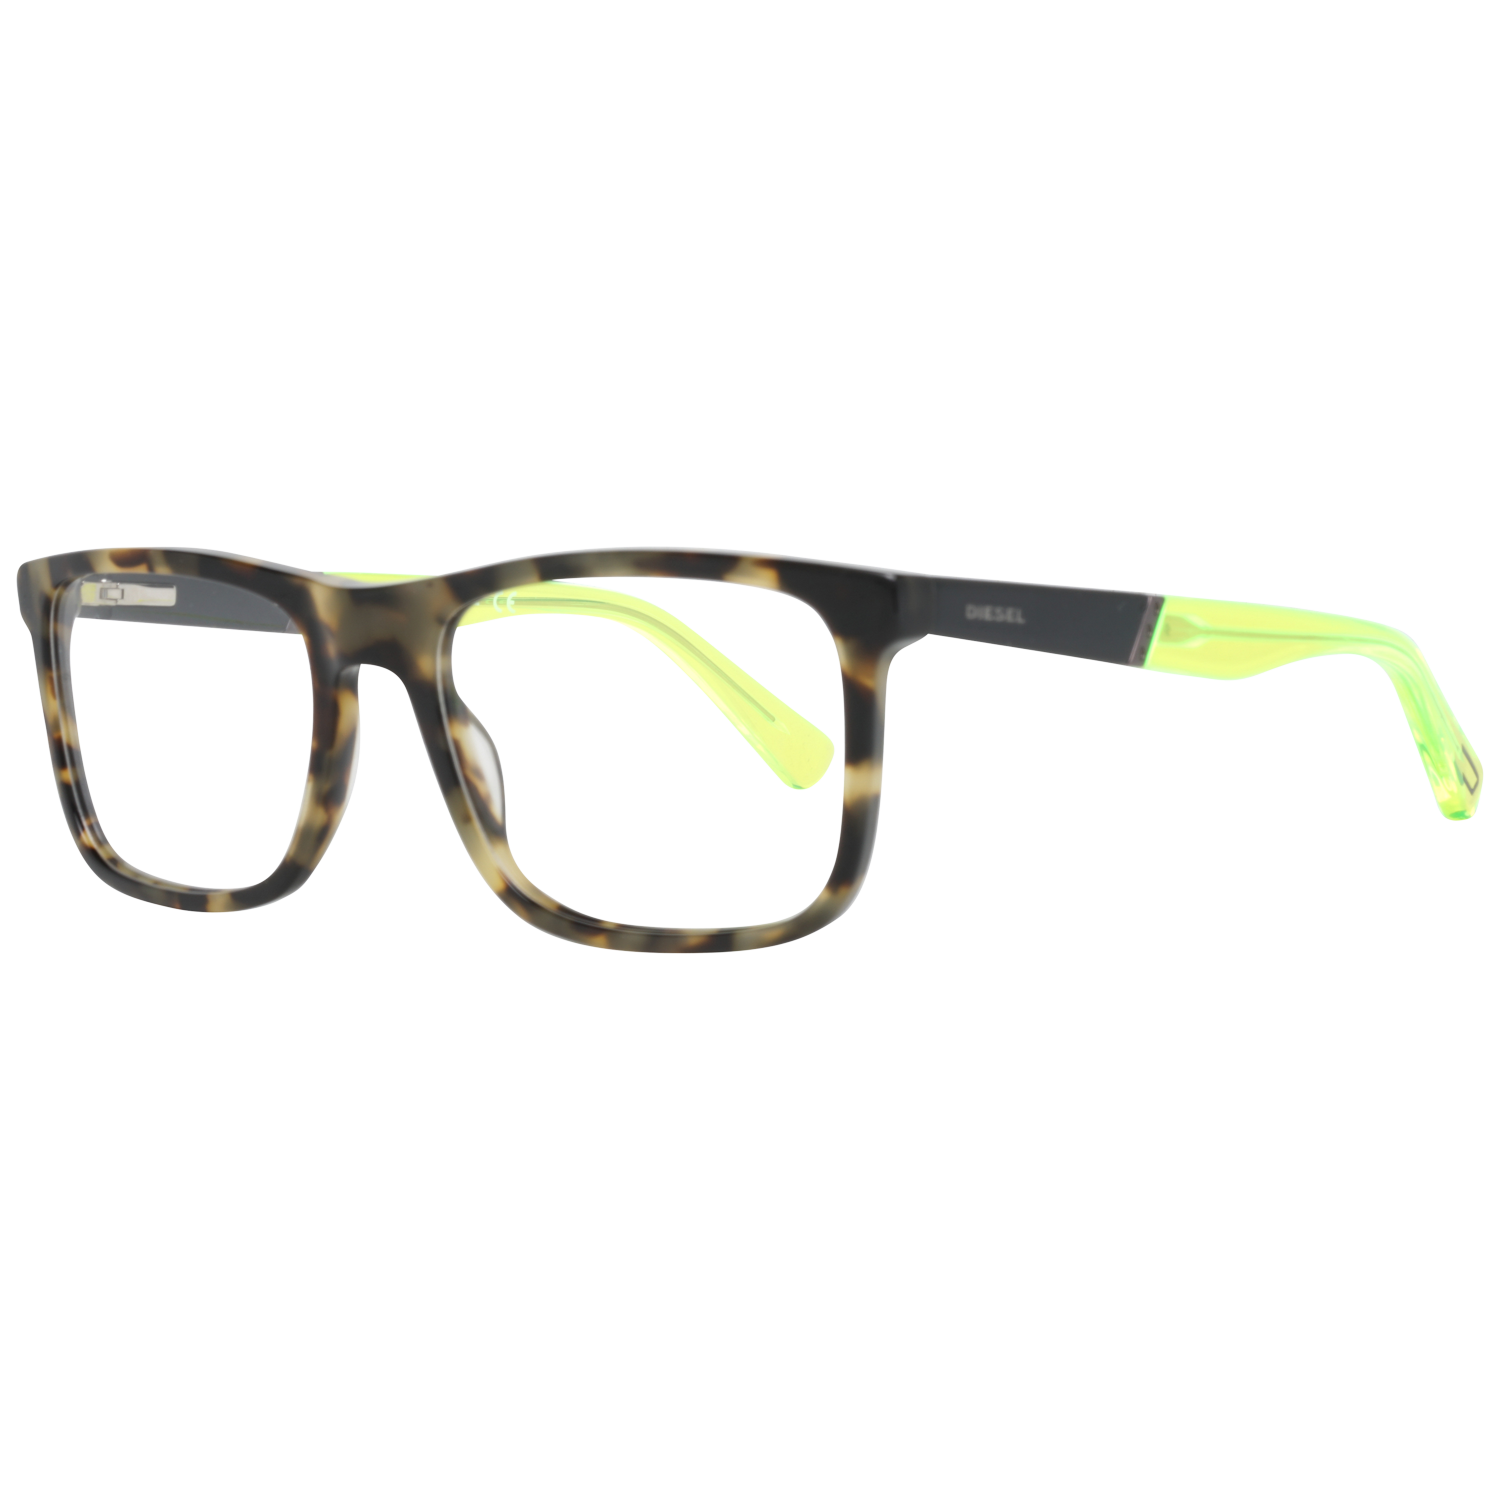 GenderMenMain colorBrownFrame colorBrownFrame materialPlasticSize54-18-145Lenses width54mmLenses heigth38mmBridge length18mmFrame width140mmTemple length145mmShipment includesCase, Cleaning clothStyleFull-RimSpring hingeNo